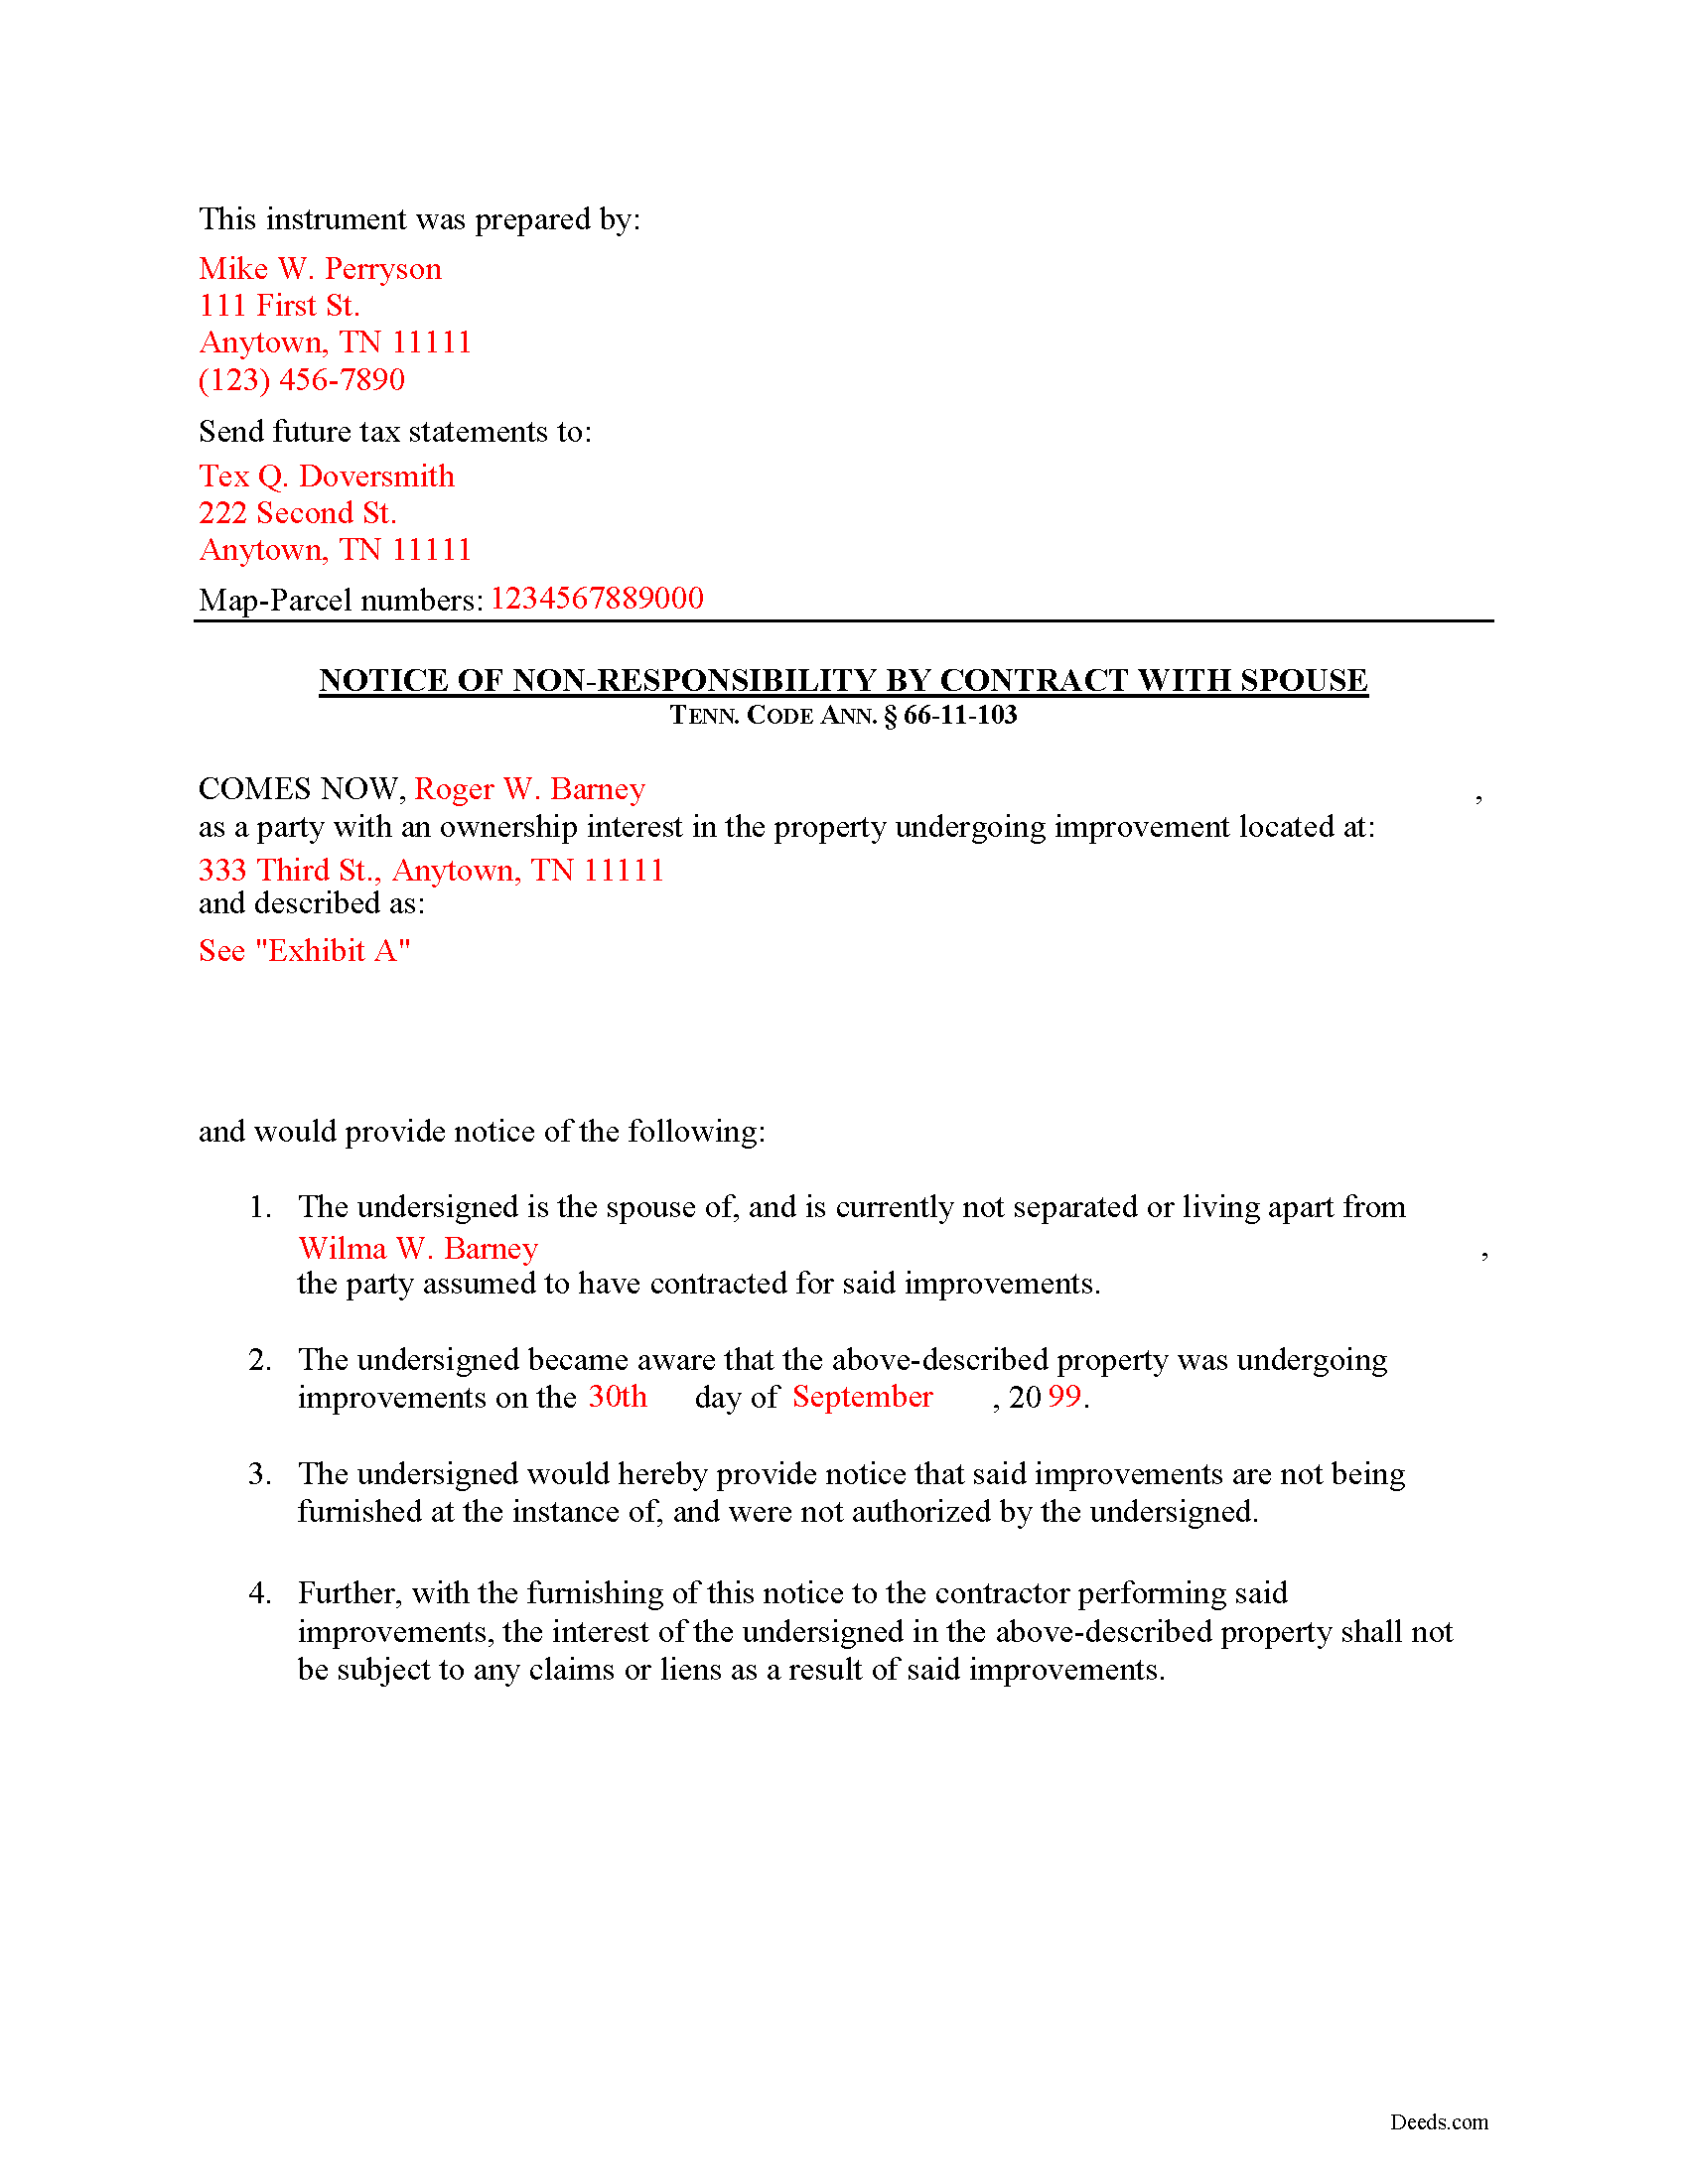 Completed Example of the Notice of Non-Responsibility Document